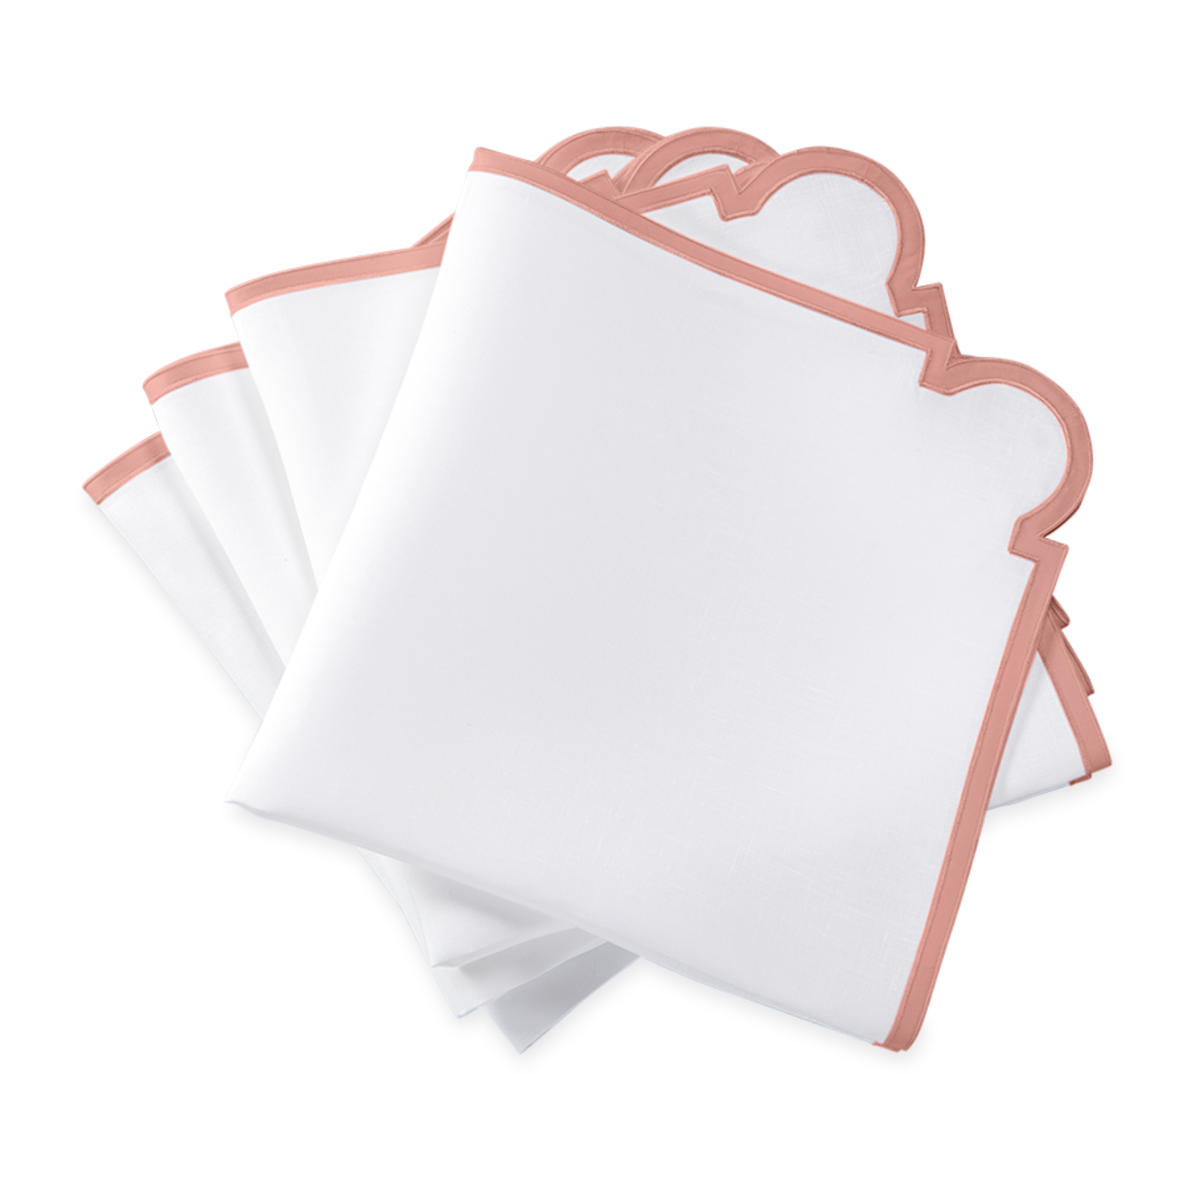 Stack of Matouk Mirasol Table Linen Napkins in Shell Color